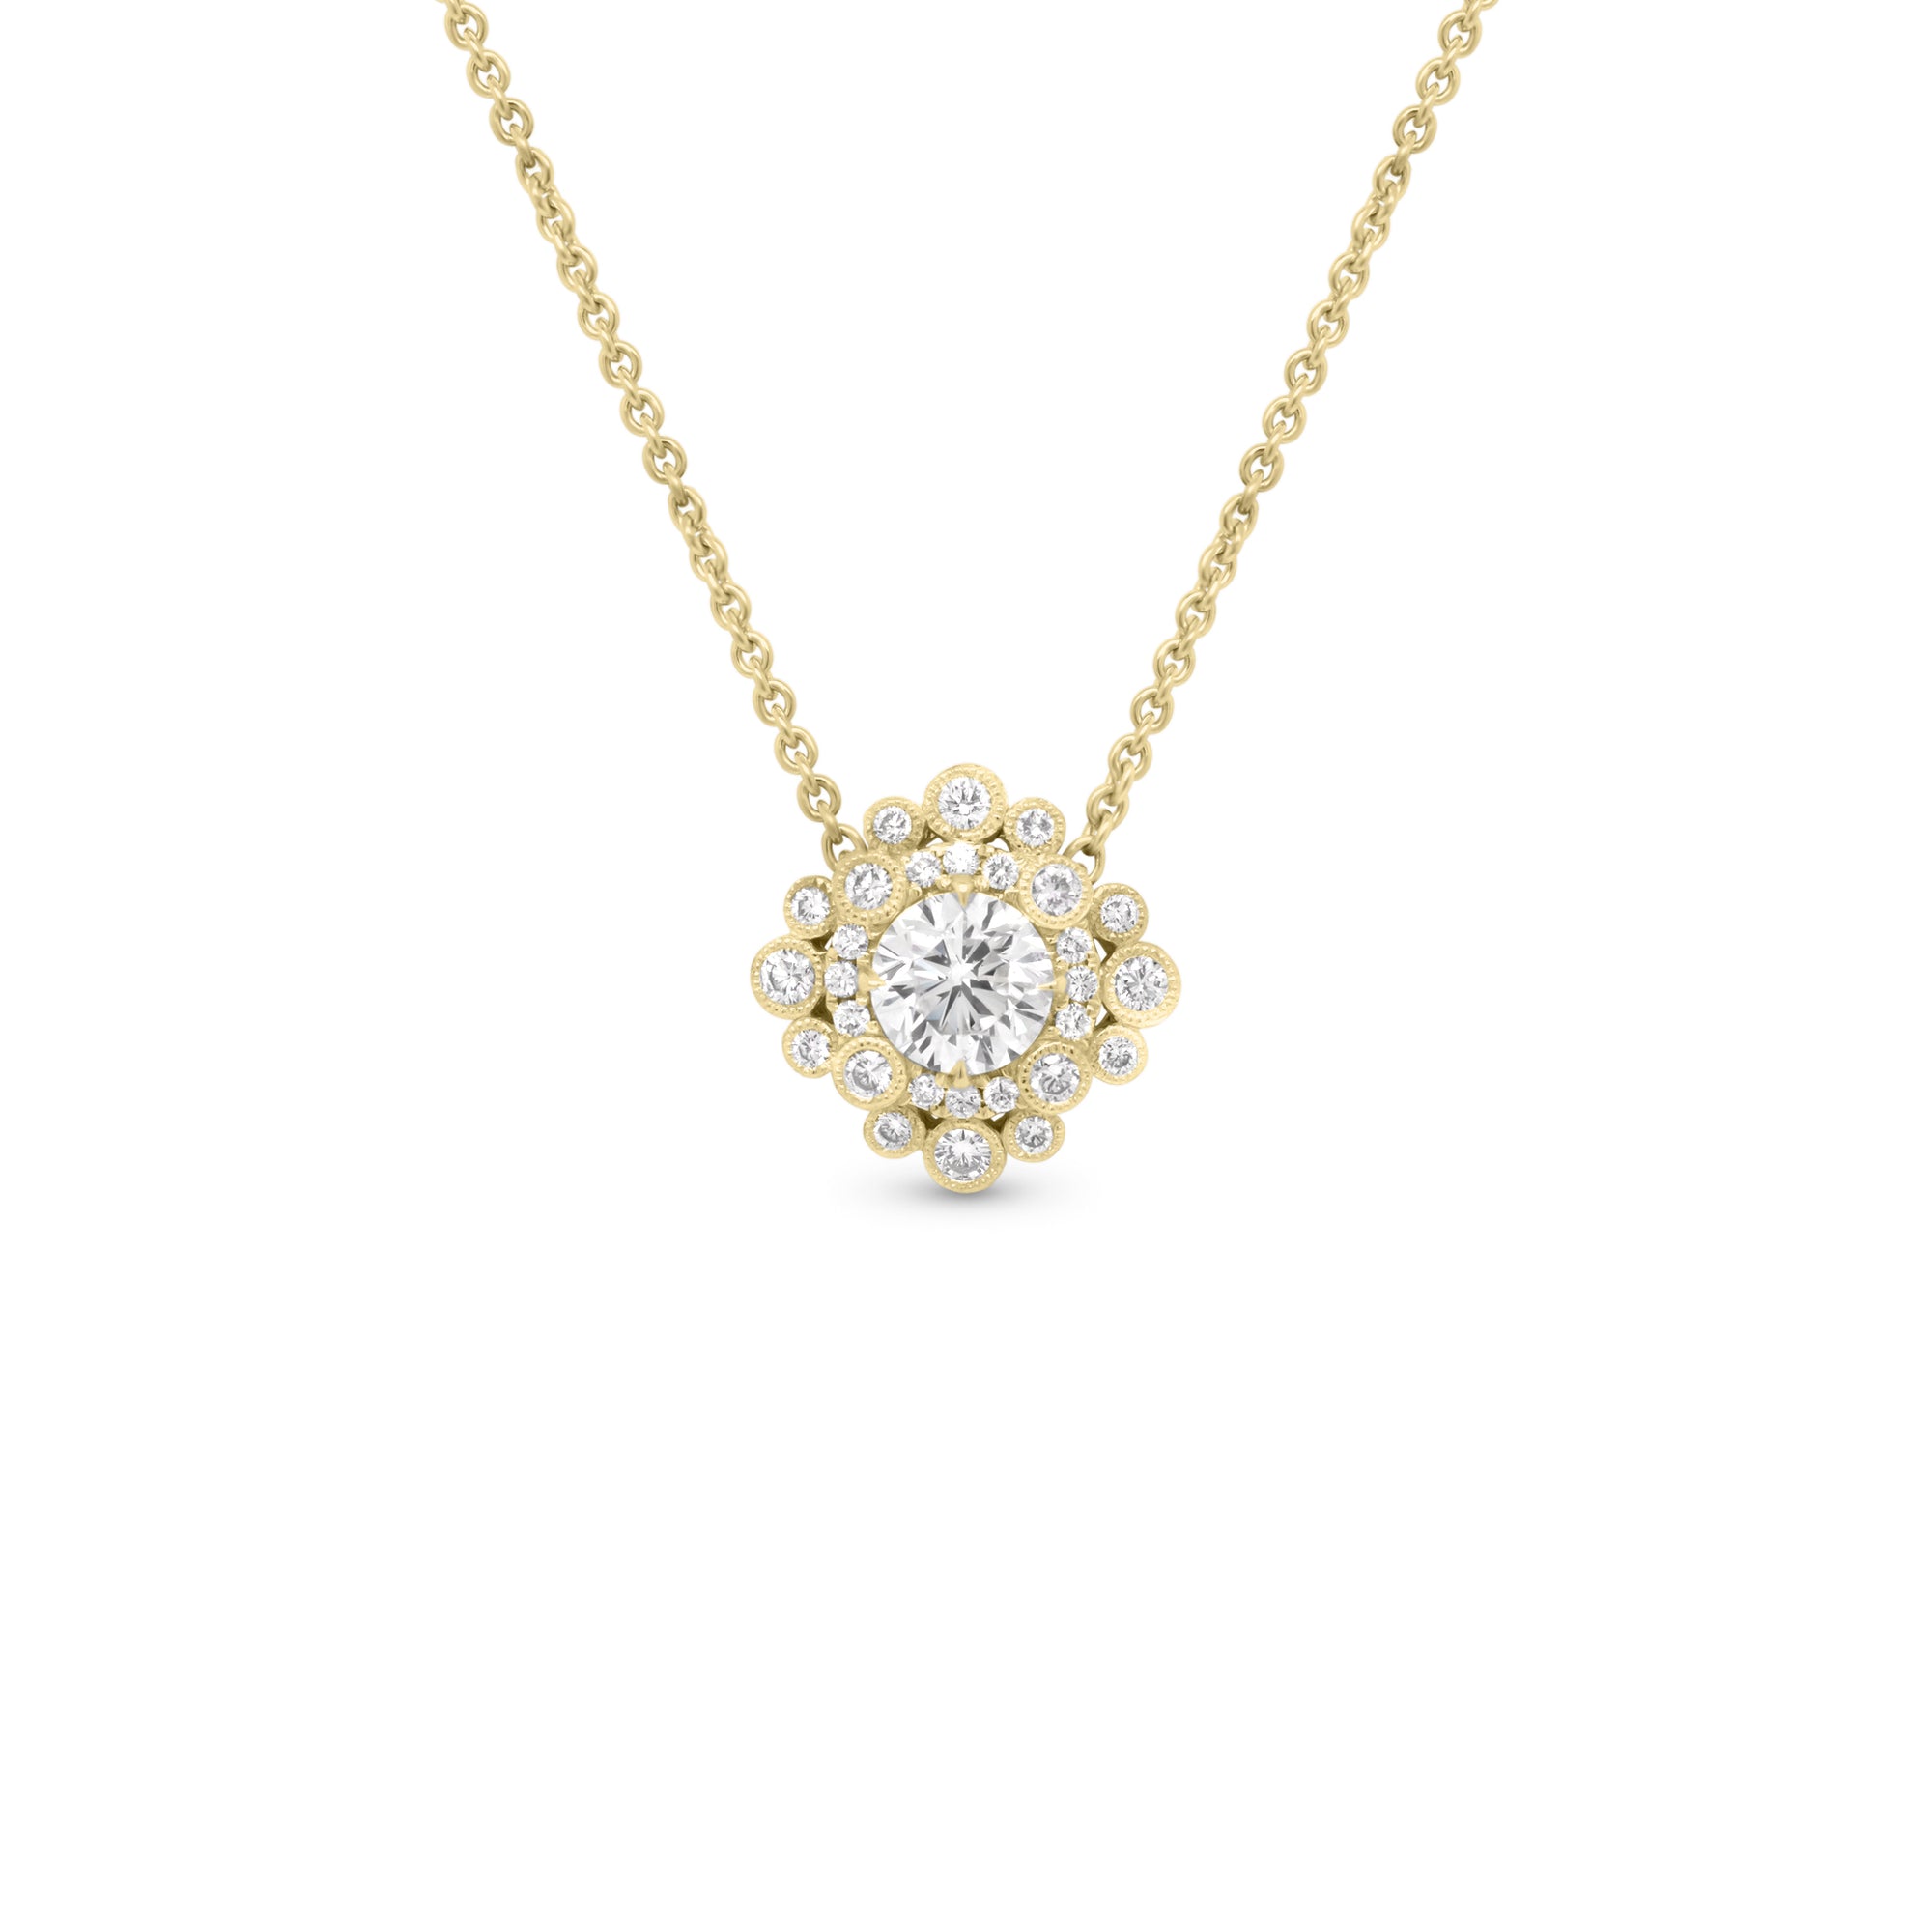 Elaborate Diamond Pendant - 14K gold weighing 5.40 grams  - 1.00 ct round diamond (GIA-graded G-color, I1 clarity)  - 28 round diamonds weighing 0.38 carats